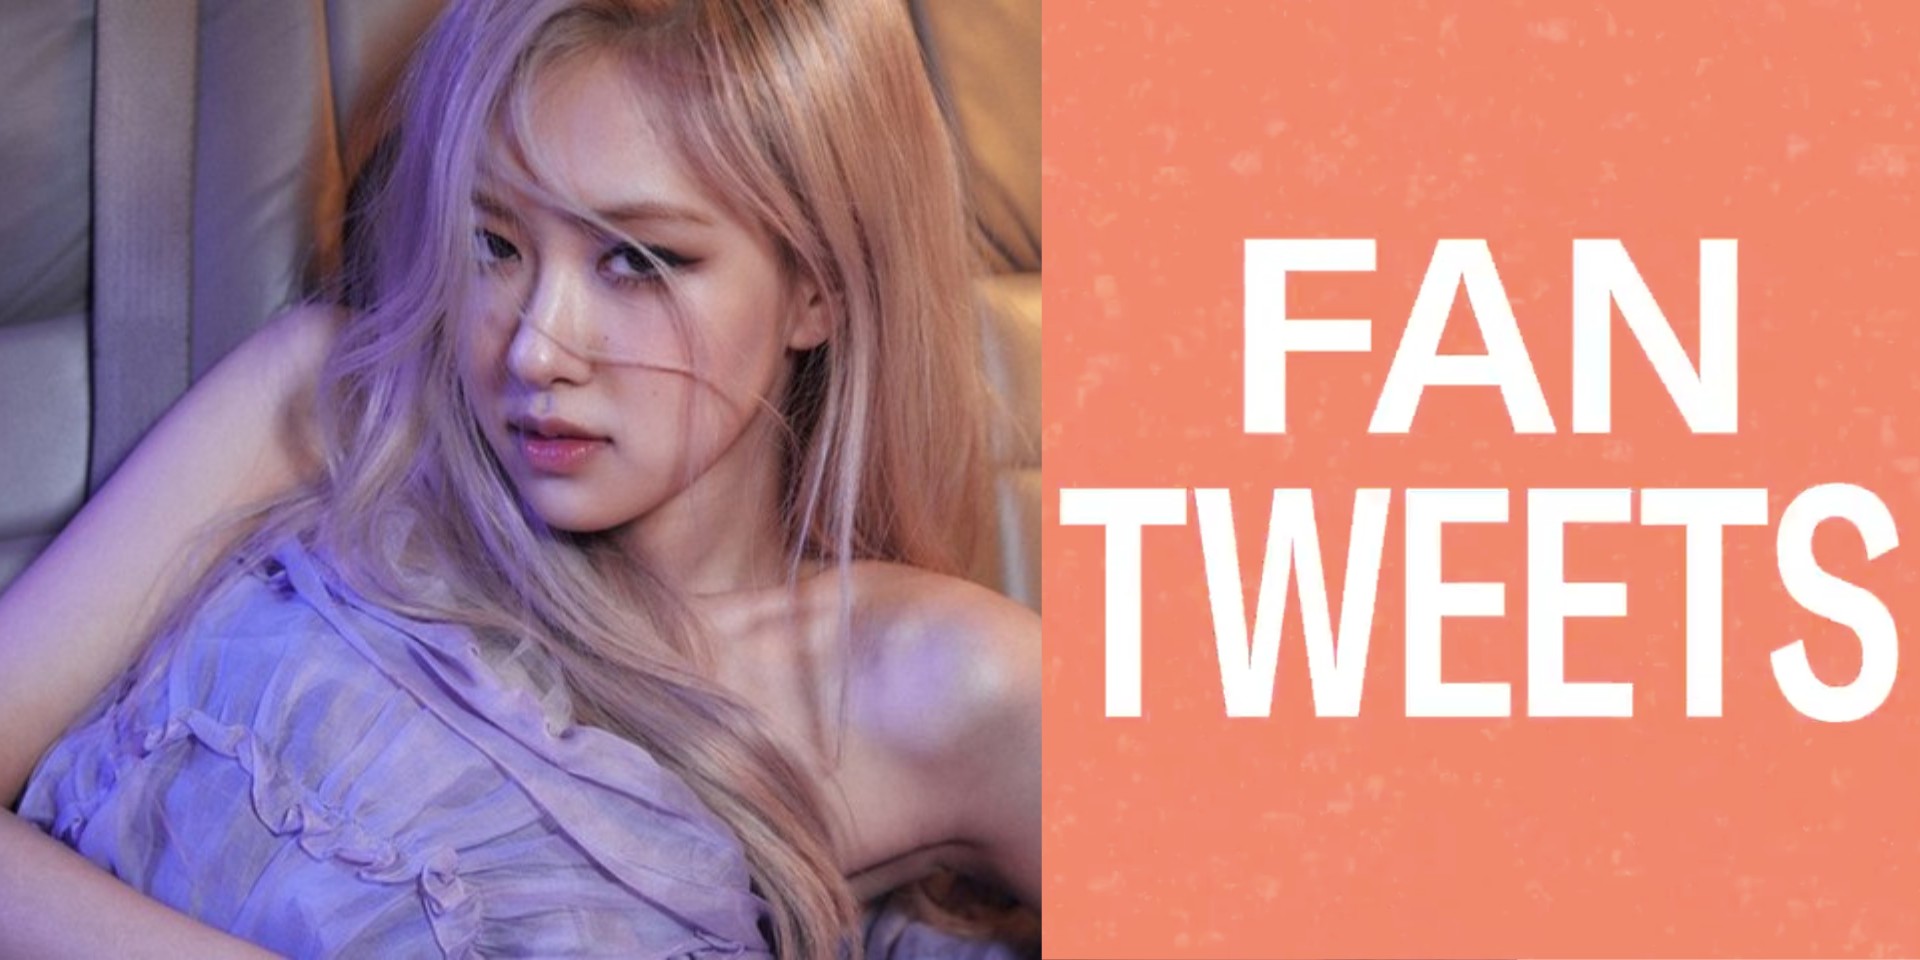 BLACKPINK's ROSÉ chats about life, performing, and her dog on Twitter's #FanTweets